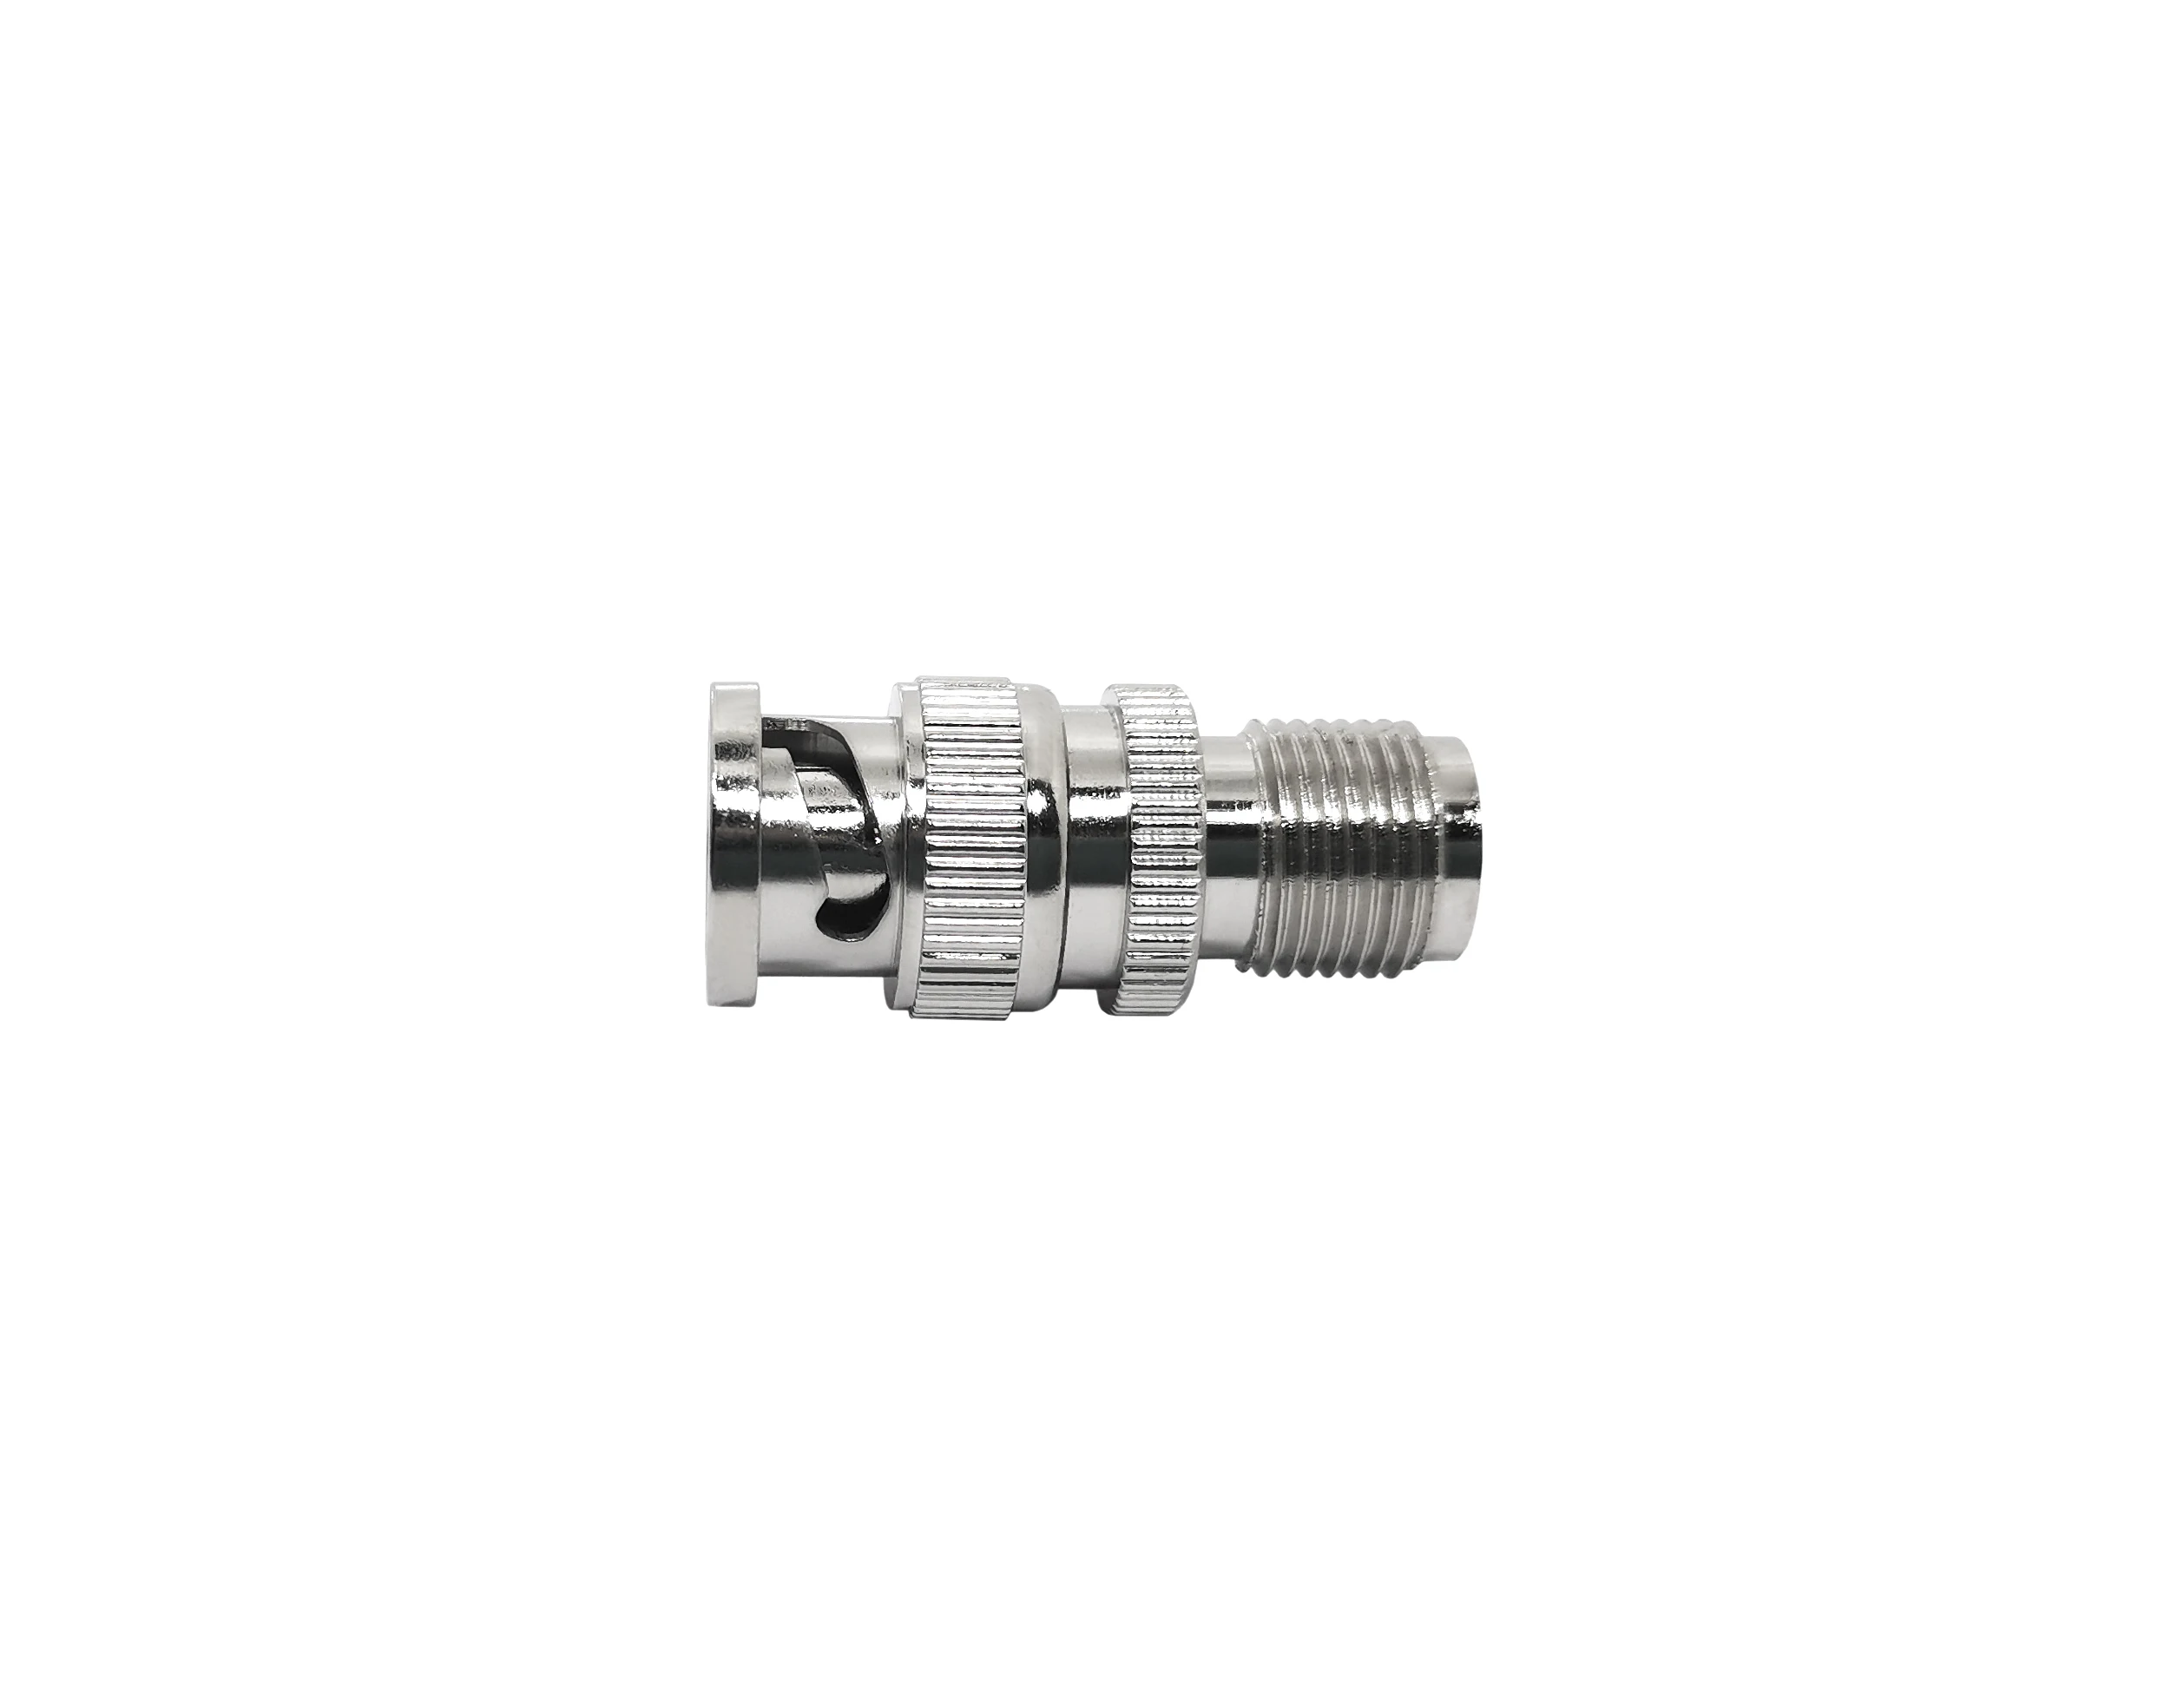 Copper RF Coaxial Connector TNC Female to BNC Male Adapter details